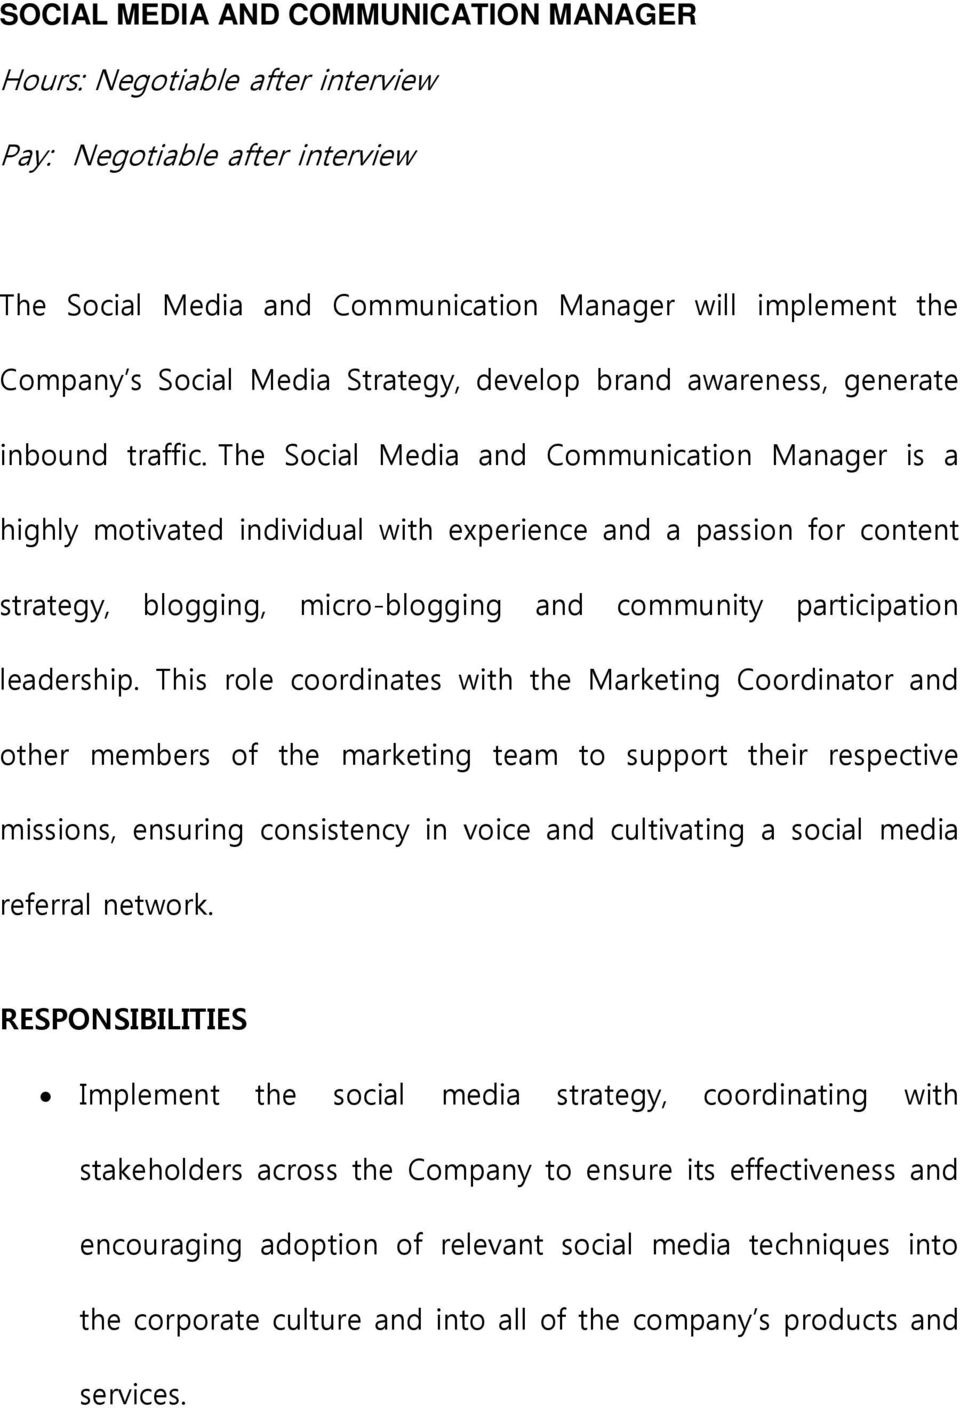 The Social Media and Communication Manager is a highly motivated individual with experience and a passion for content strategy, blogging, micro-blogging and community participation leadership.